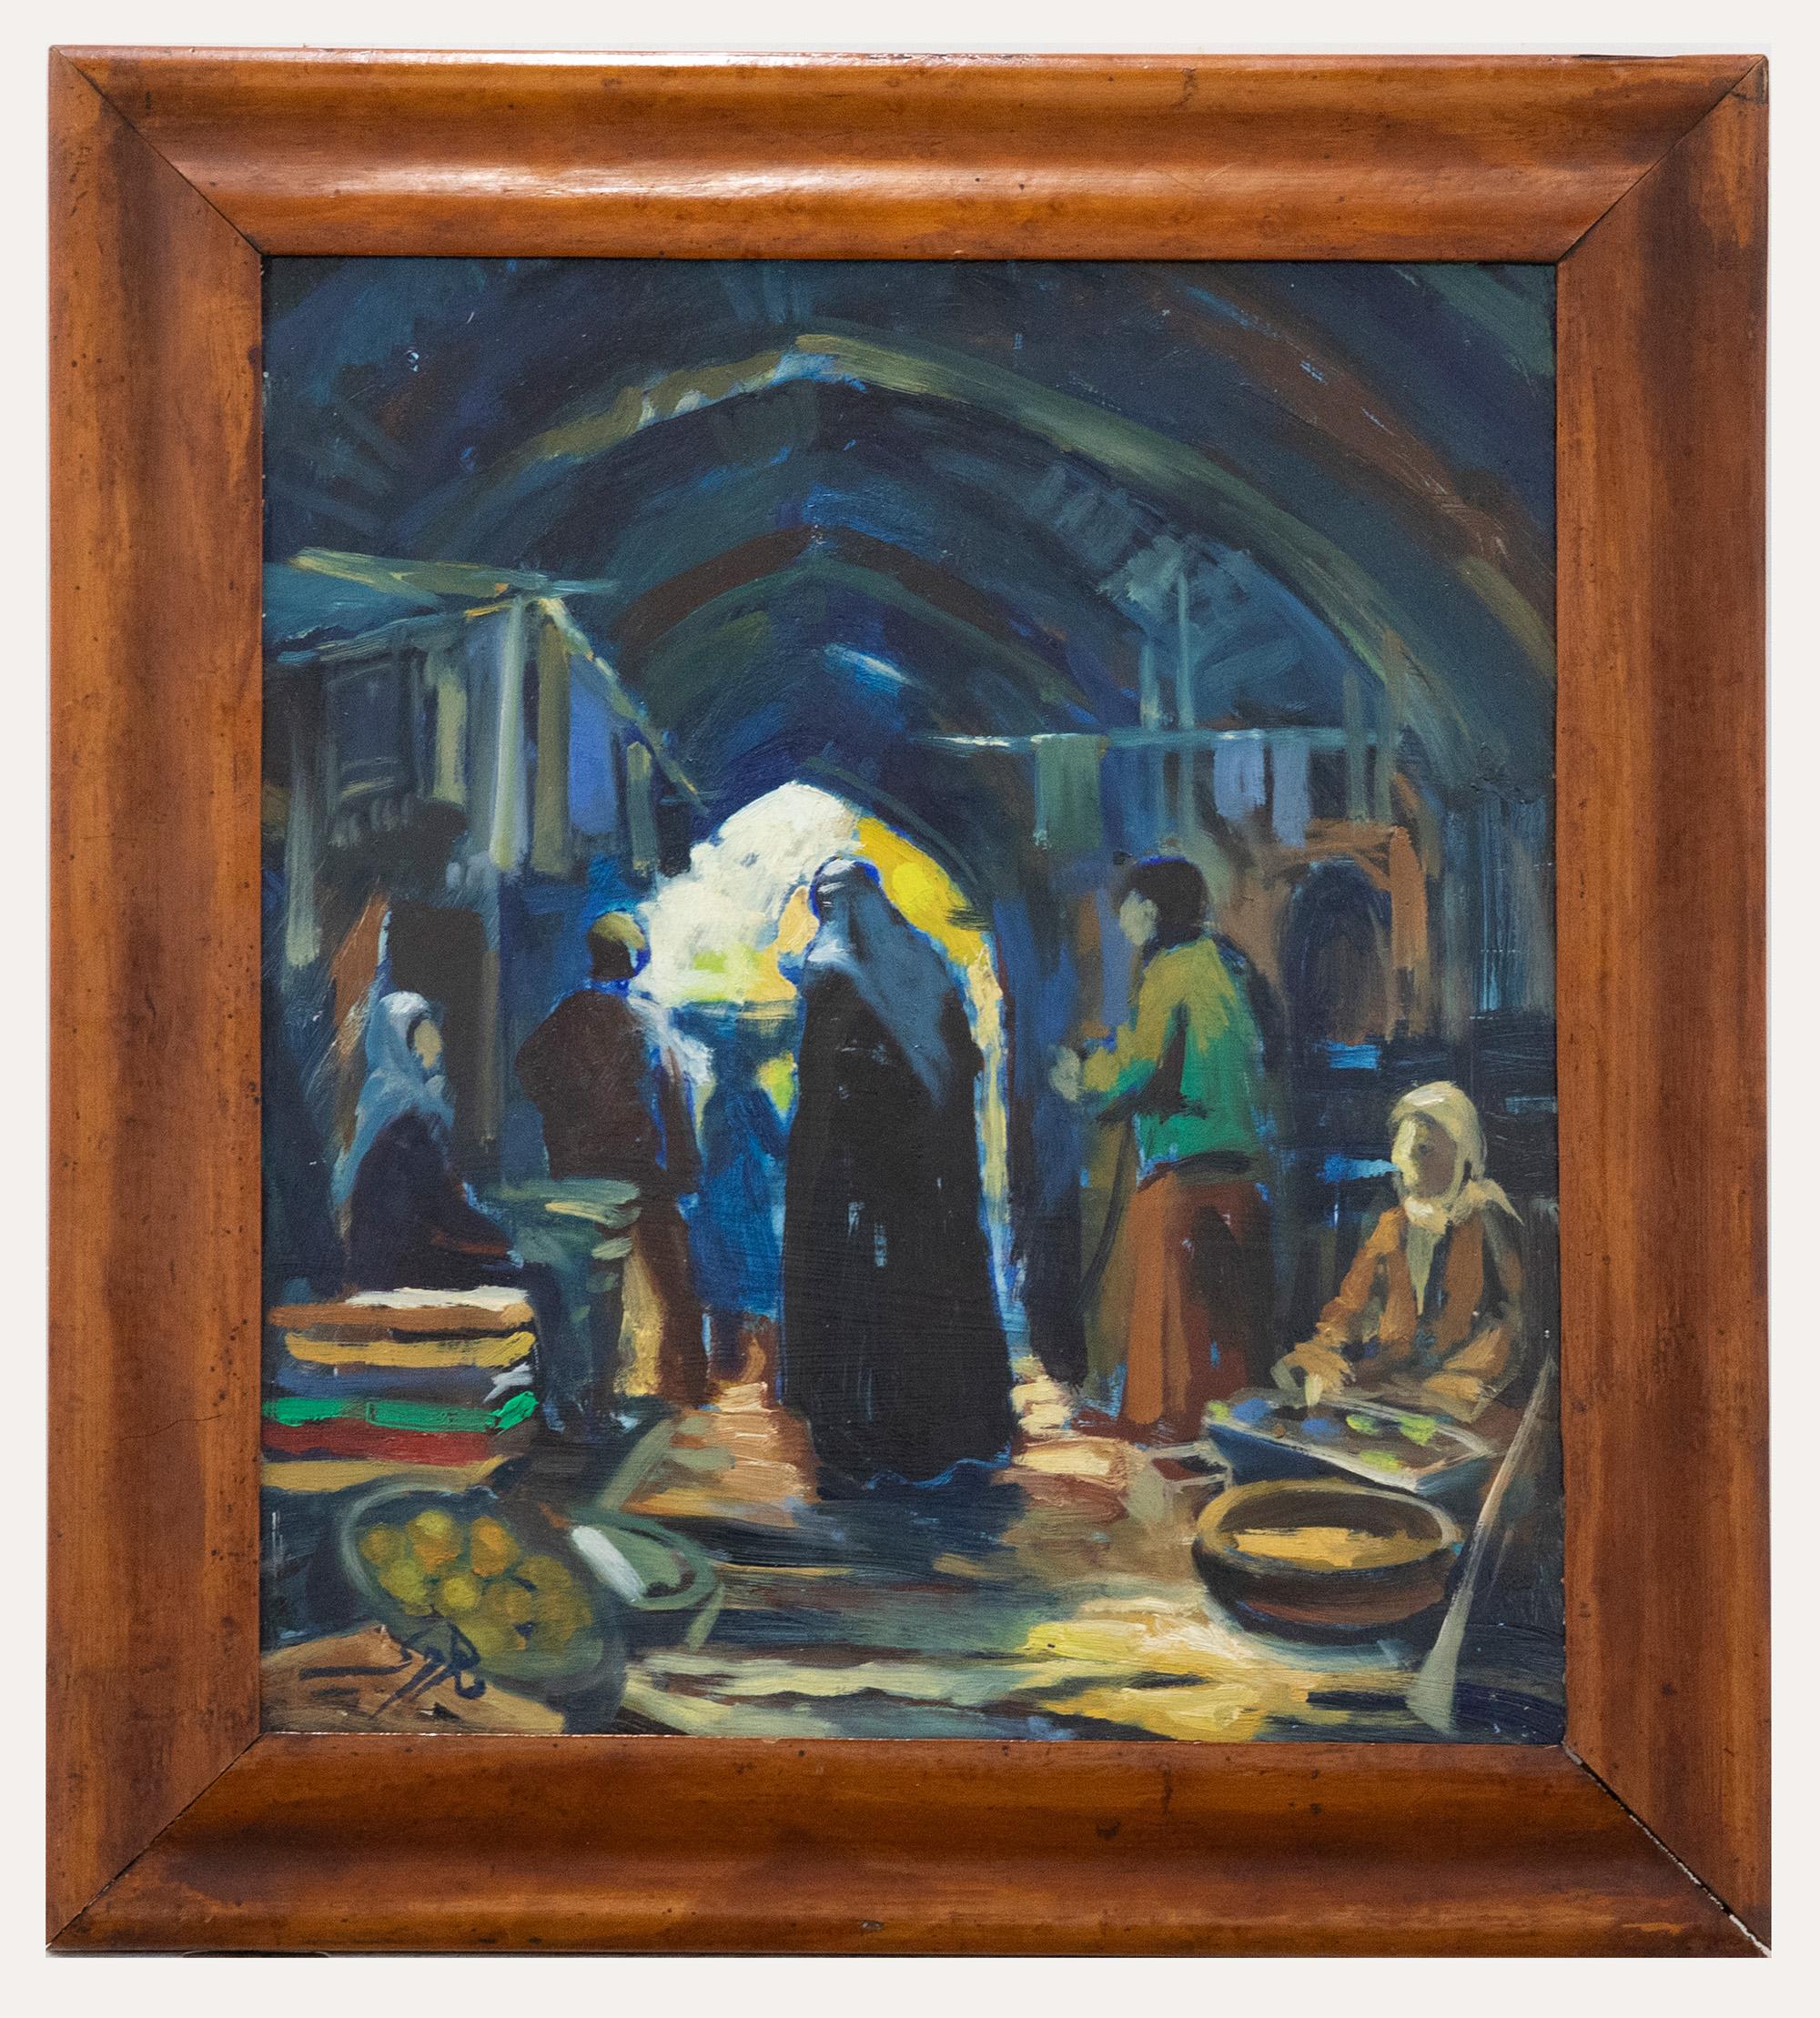 Unknown Figurative Painting - Maher Harb  - 1991 Oil, Mosul Street Market